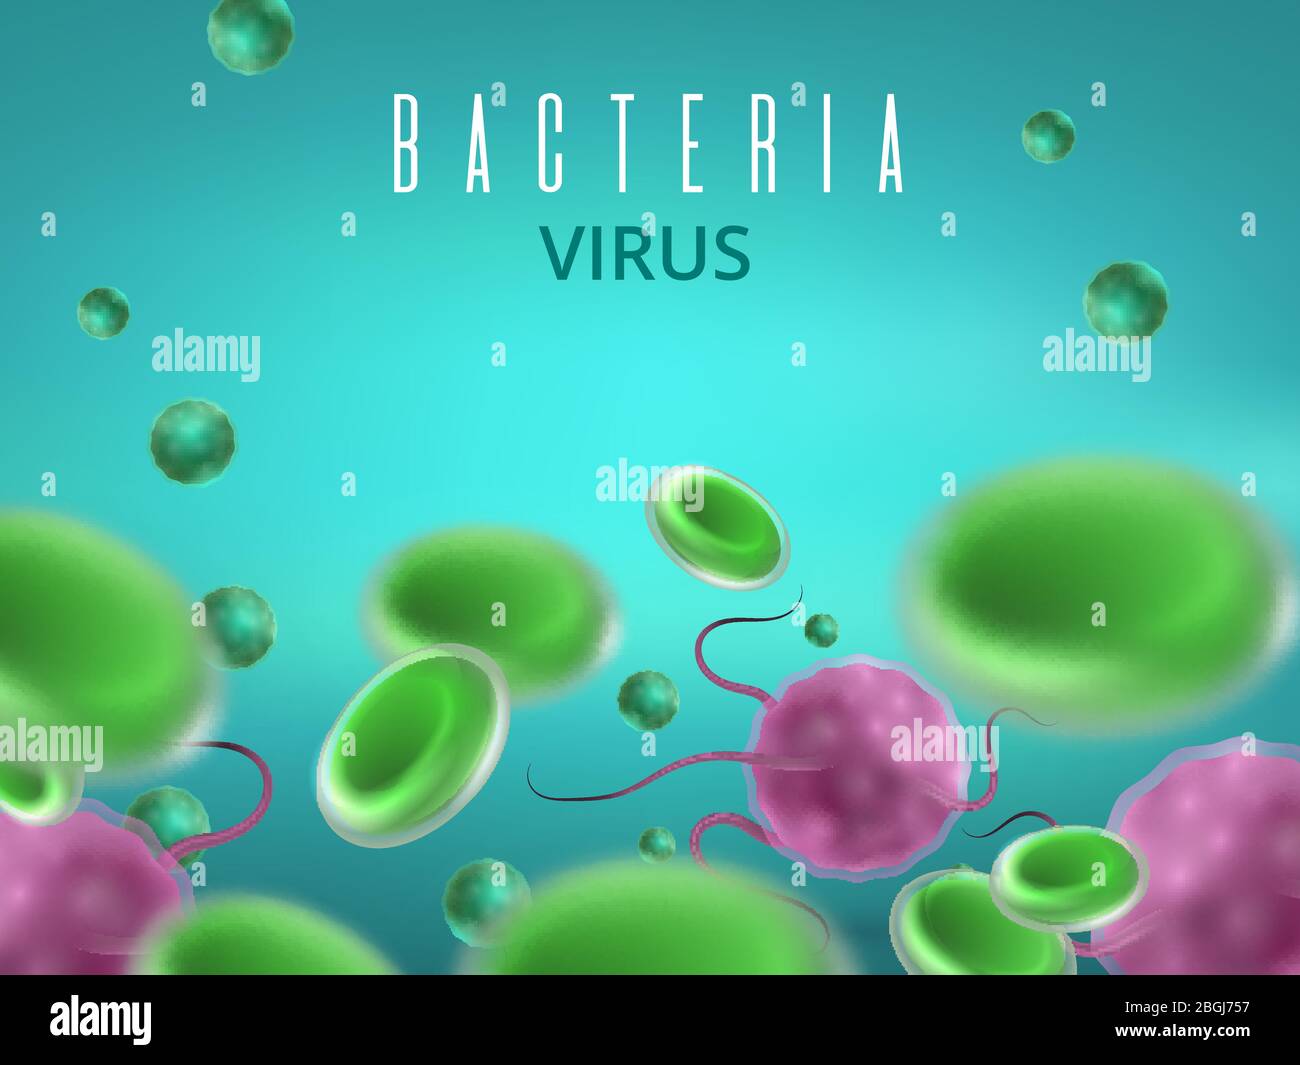 Biology medical science concept. Abstract vector background with cells and viruses. Medical cell and biology research microscopic illustration Stock Vector